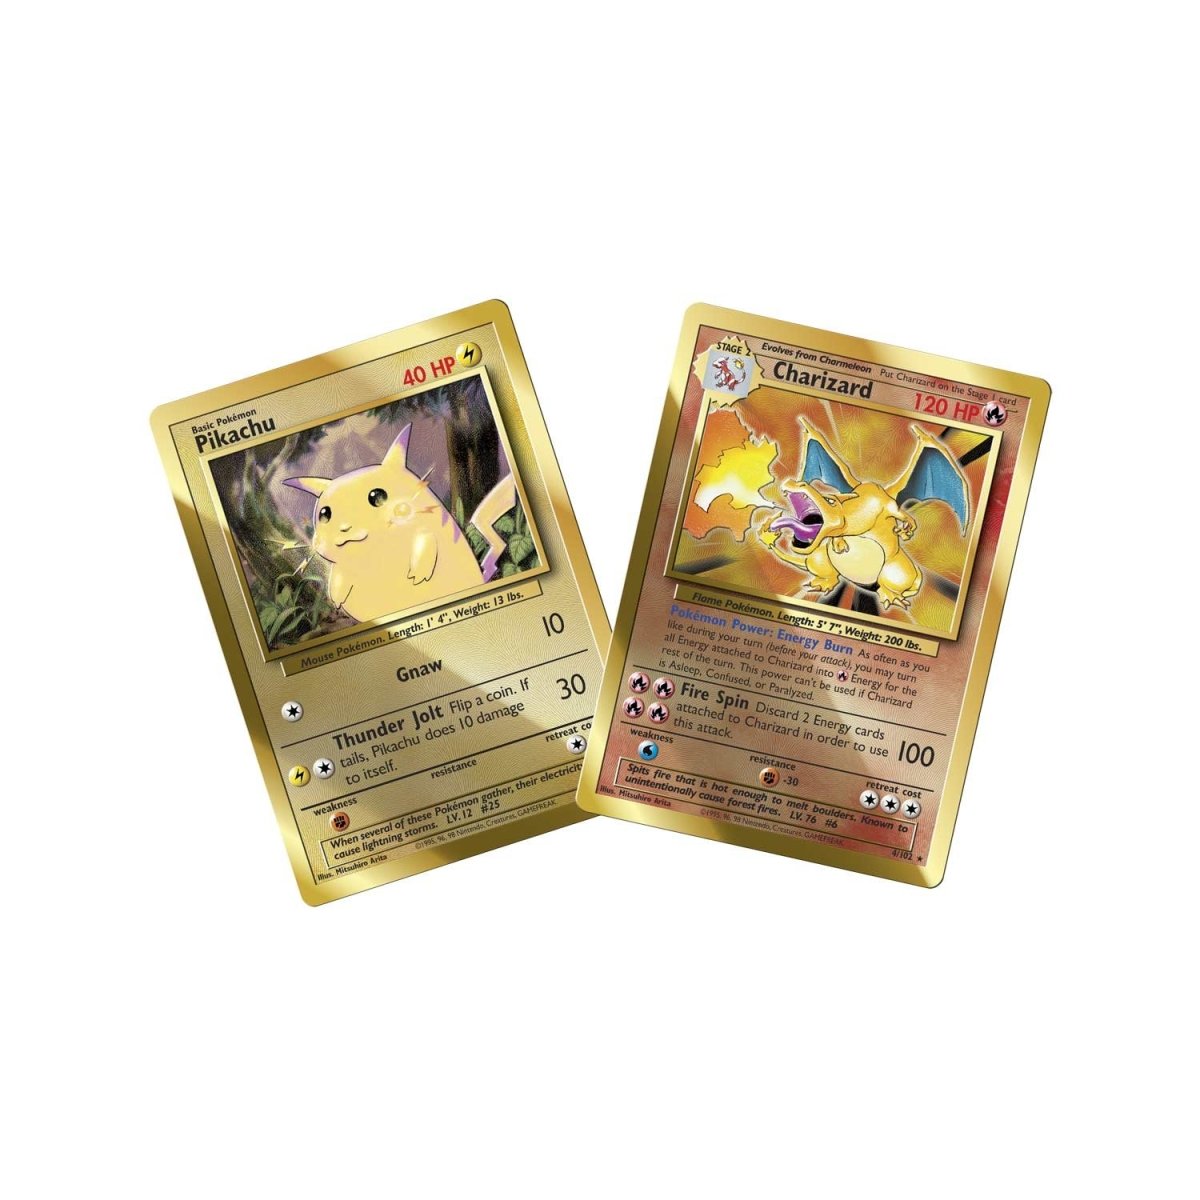 Full Lineup of English Pokemon Card 151 Products - and Pricing